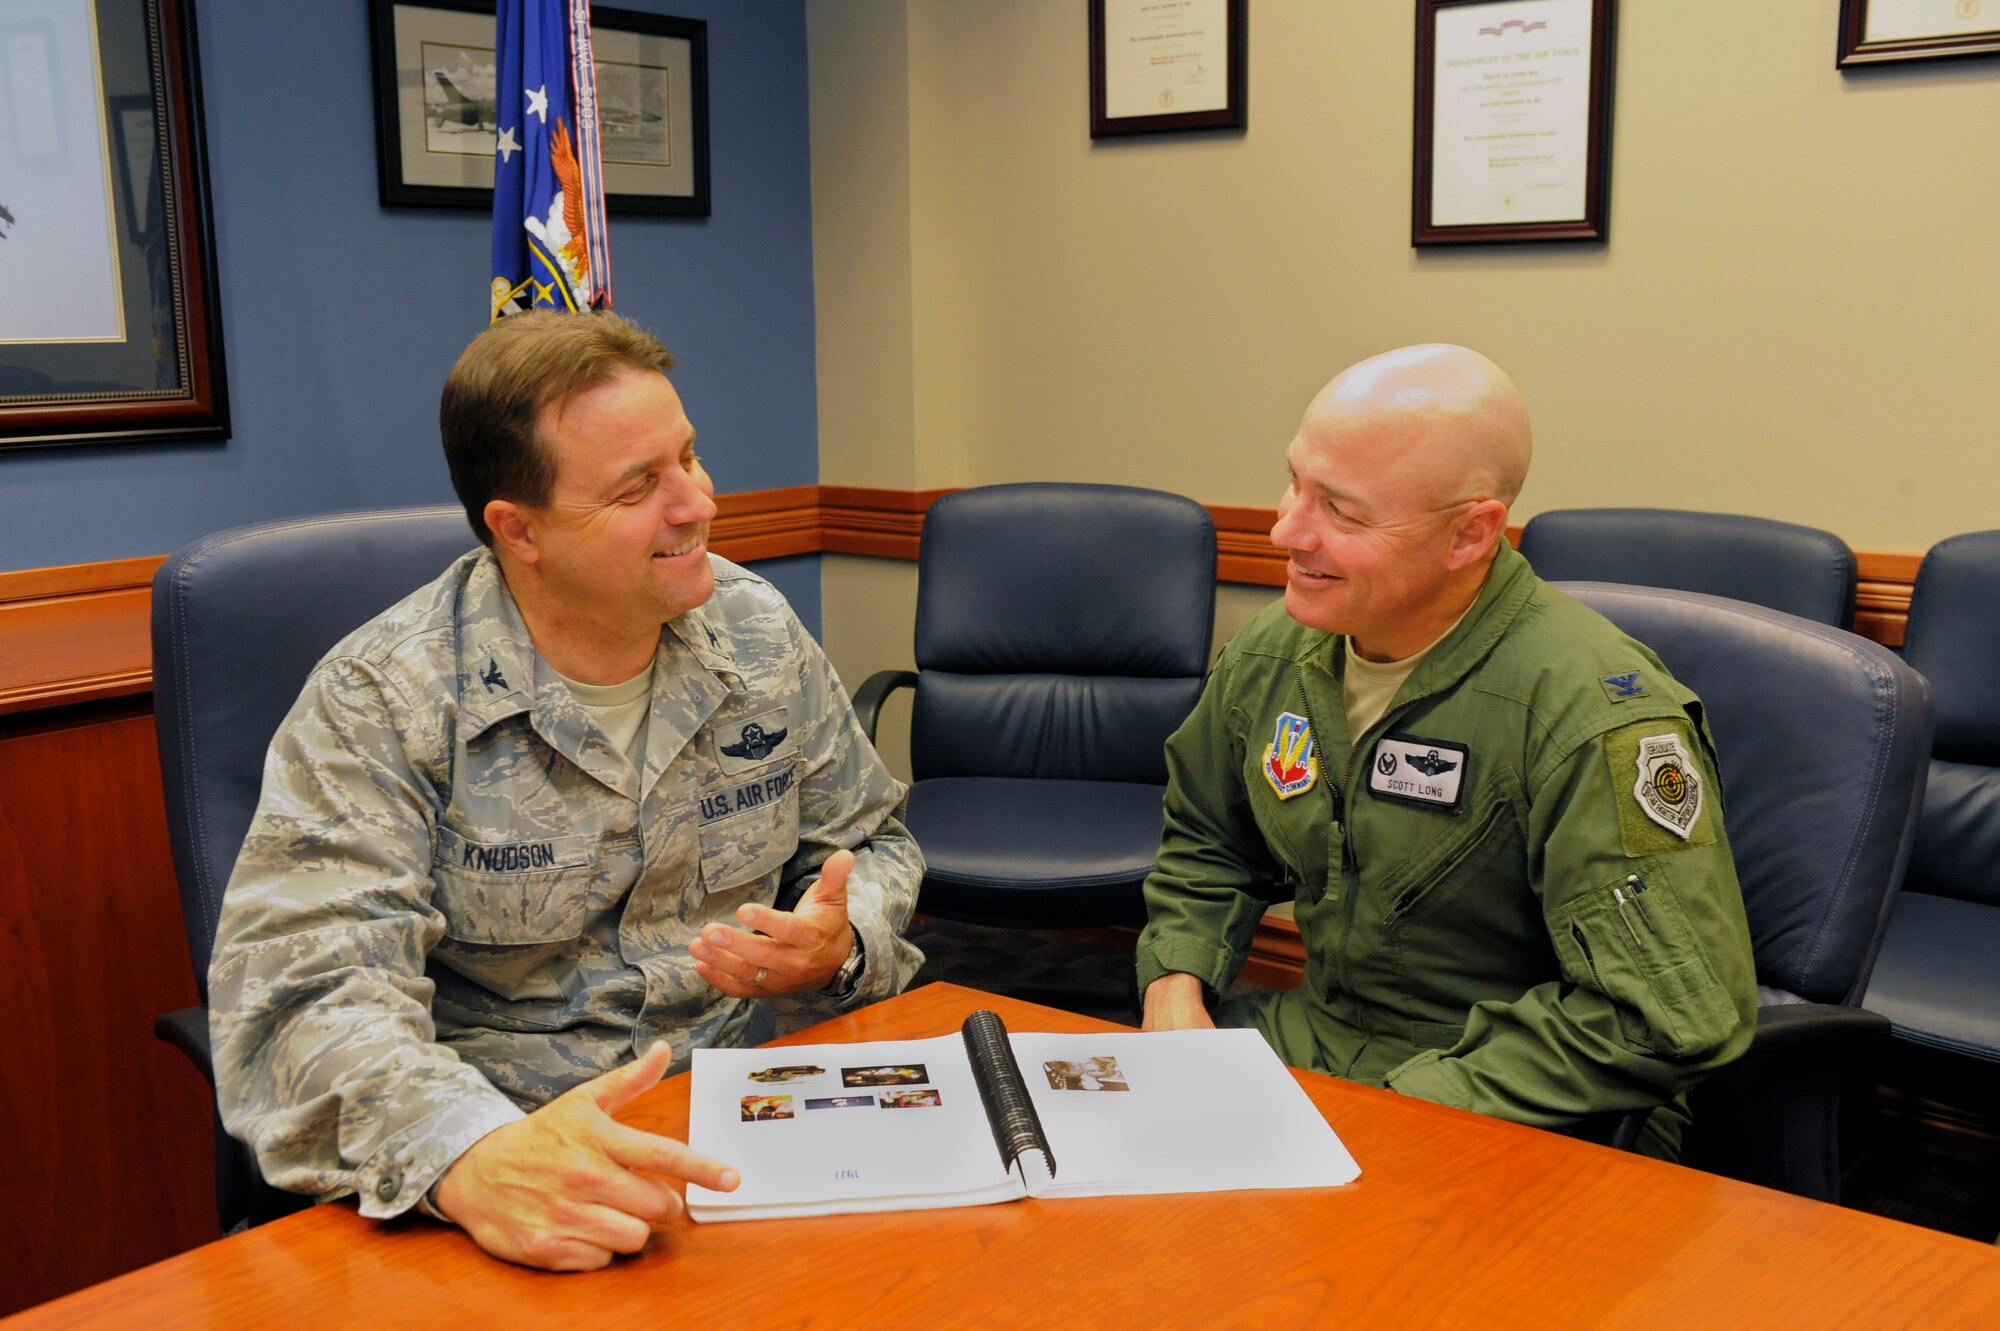 Two wing commanders at Hill AFB, Utah, have taken the Air Force’s Total Force Integration to a whole new, and very personal, level.  When Air Force Reserve Col. Keith “K2” Knudson, commander of the 419th Fighter Wing (on left) was diagnosed with kidney failure last year, his active duty counterpart, Col. Scott “Chemo” Long, commander of the 388th FW, volunteered to donate a kidney of his own.  The 419th FW is a classic associate Reserve unit tied to the 388th FW.  As part of their duties, Long and Knudson have worked closely on how best to capitalize on their shared equipment and facilities. Now they may soon be sharing a kidney.  “We’re taking TFI to a different level,” Long joked.  “We’re talking total organ integration.” (U.S. Air Force photo/Todd Cromar)